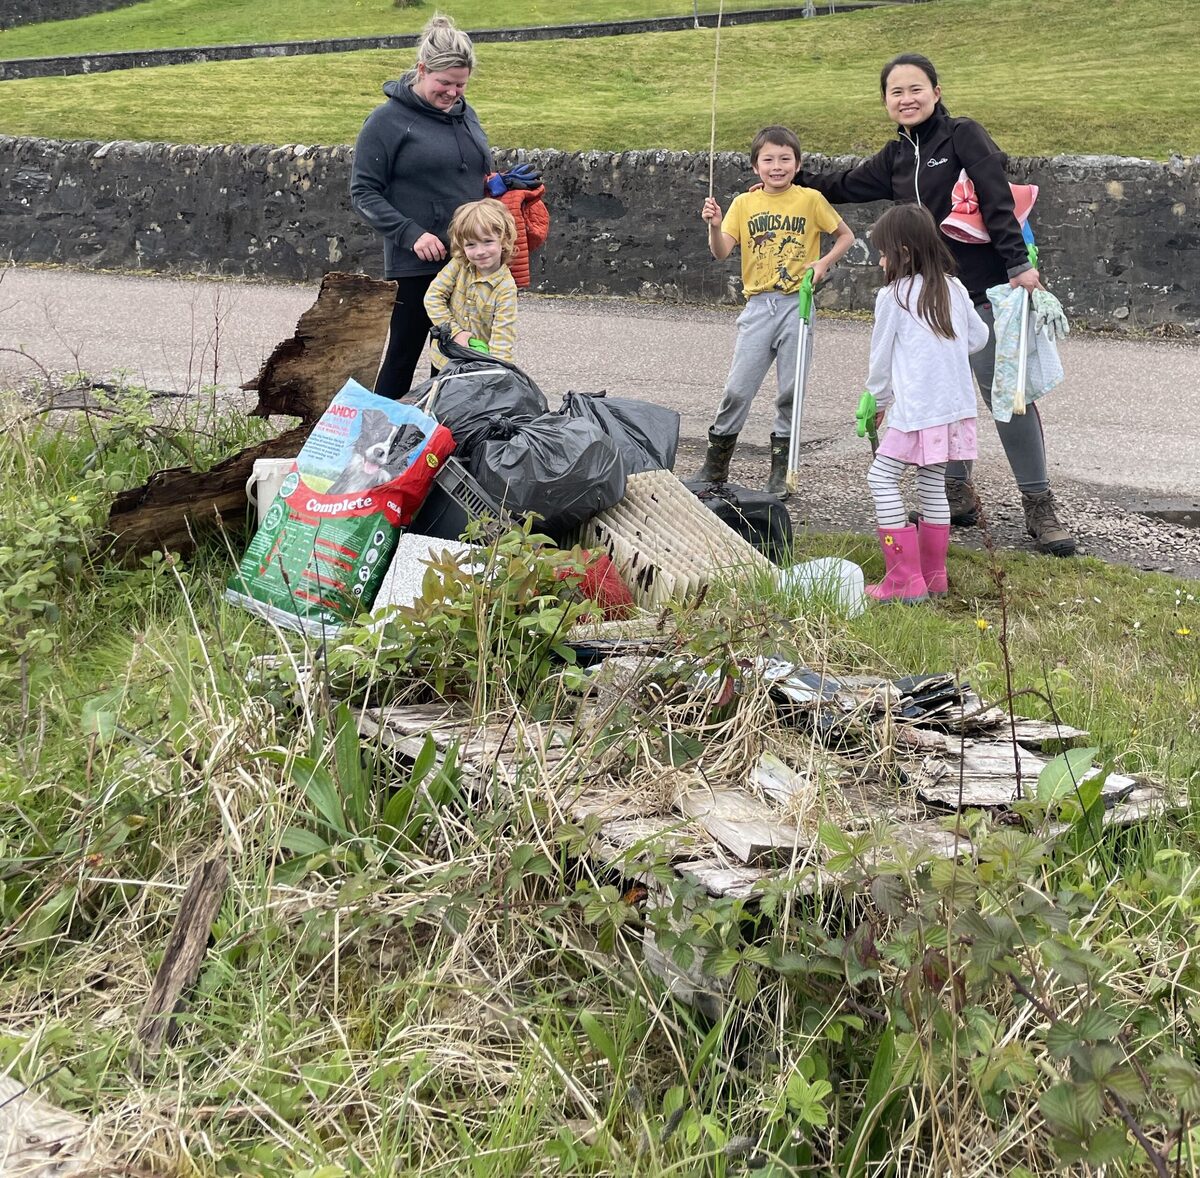 Tarbert cleans up ahead of summer